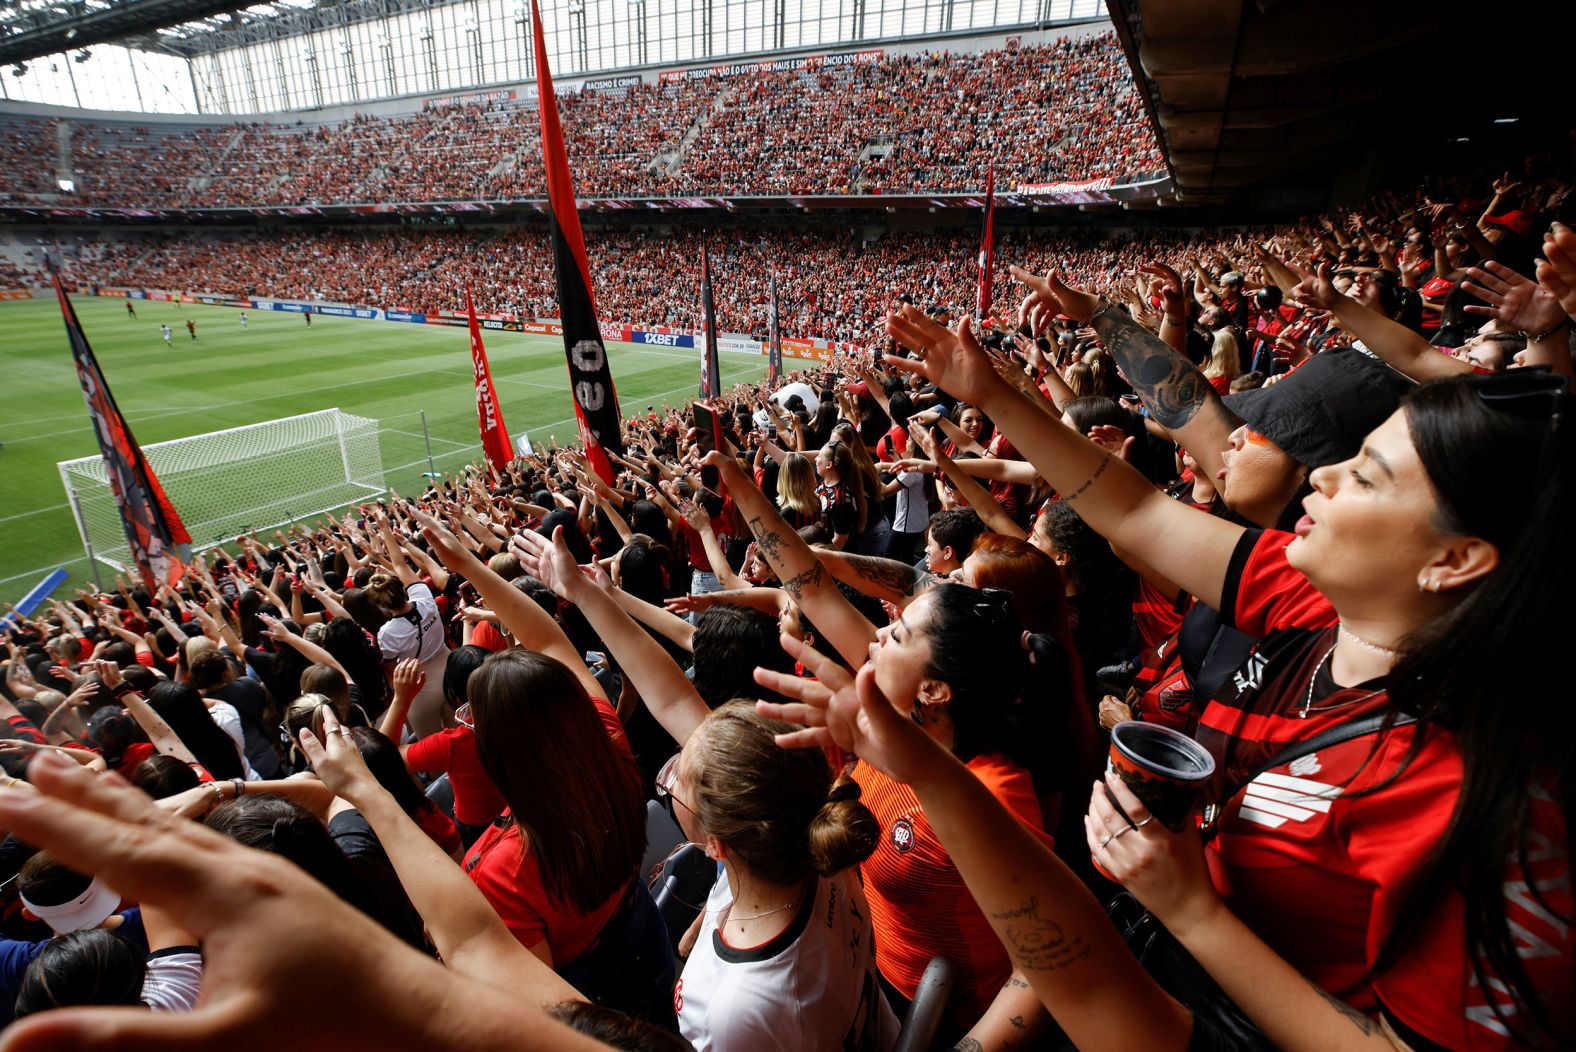 Fans of the Brazilian soccer club Athletico Paranaense attend a match in Curitiba on Saturday, January 21. Only women and children under 12 could attend the match. <a href="index.php?page=&url=https%3A%2F%2Fwestobserver.com%2Fnews%2Flatin-america%2Fathletico-pr-places-only-women-and-children-in-the-stadium-after-punishment-by-the-twisted-brigade%2F" target="_blank" target="_blank">Others were barred</a> as punishment for fights that had broken out in the stands at a match last year.